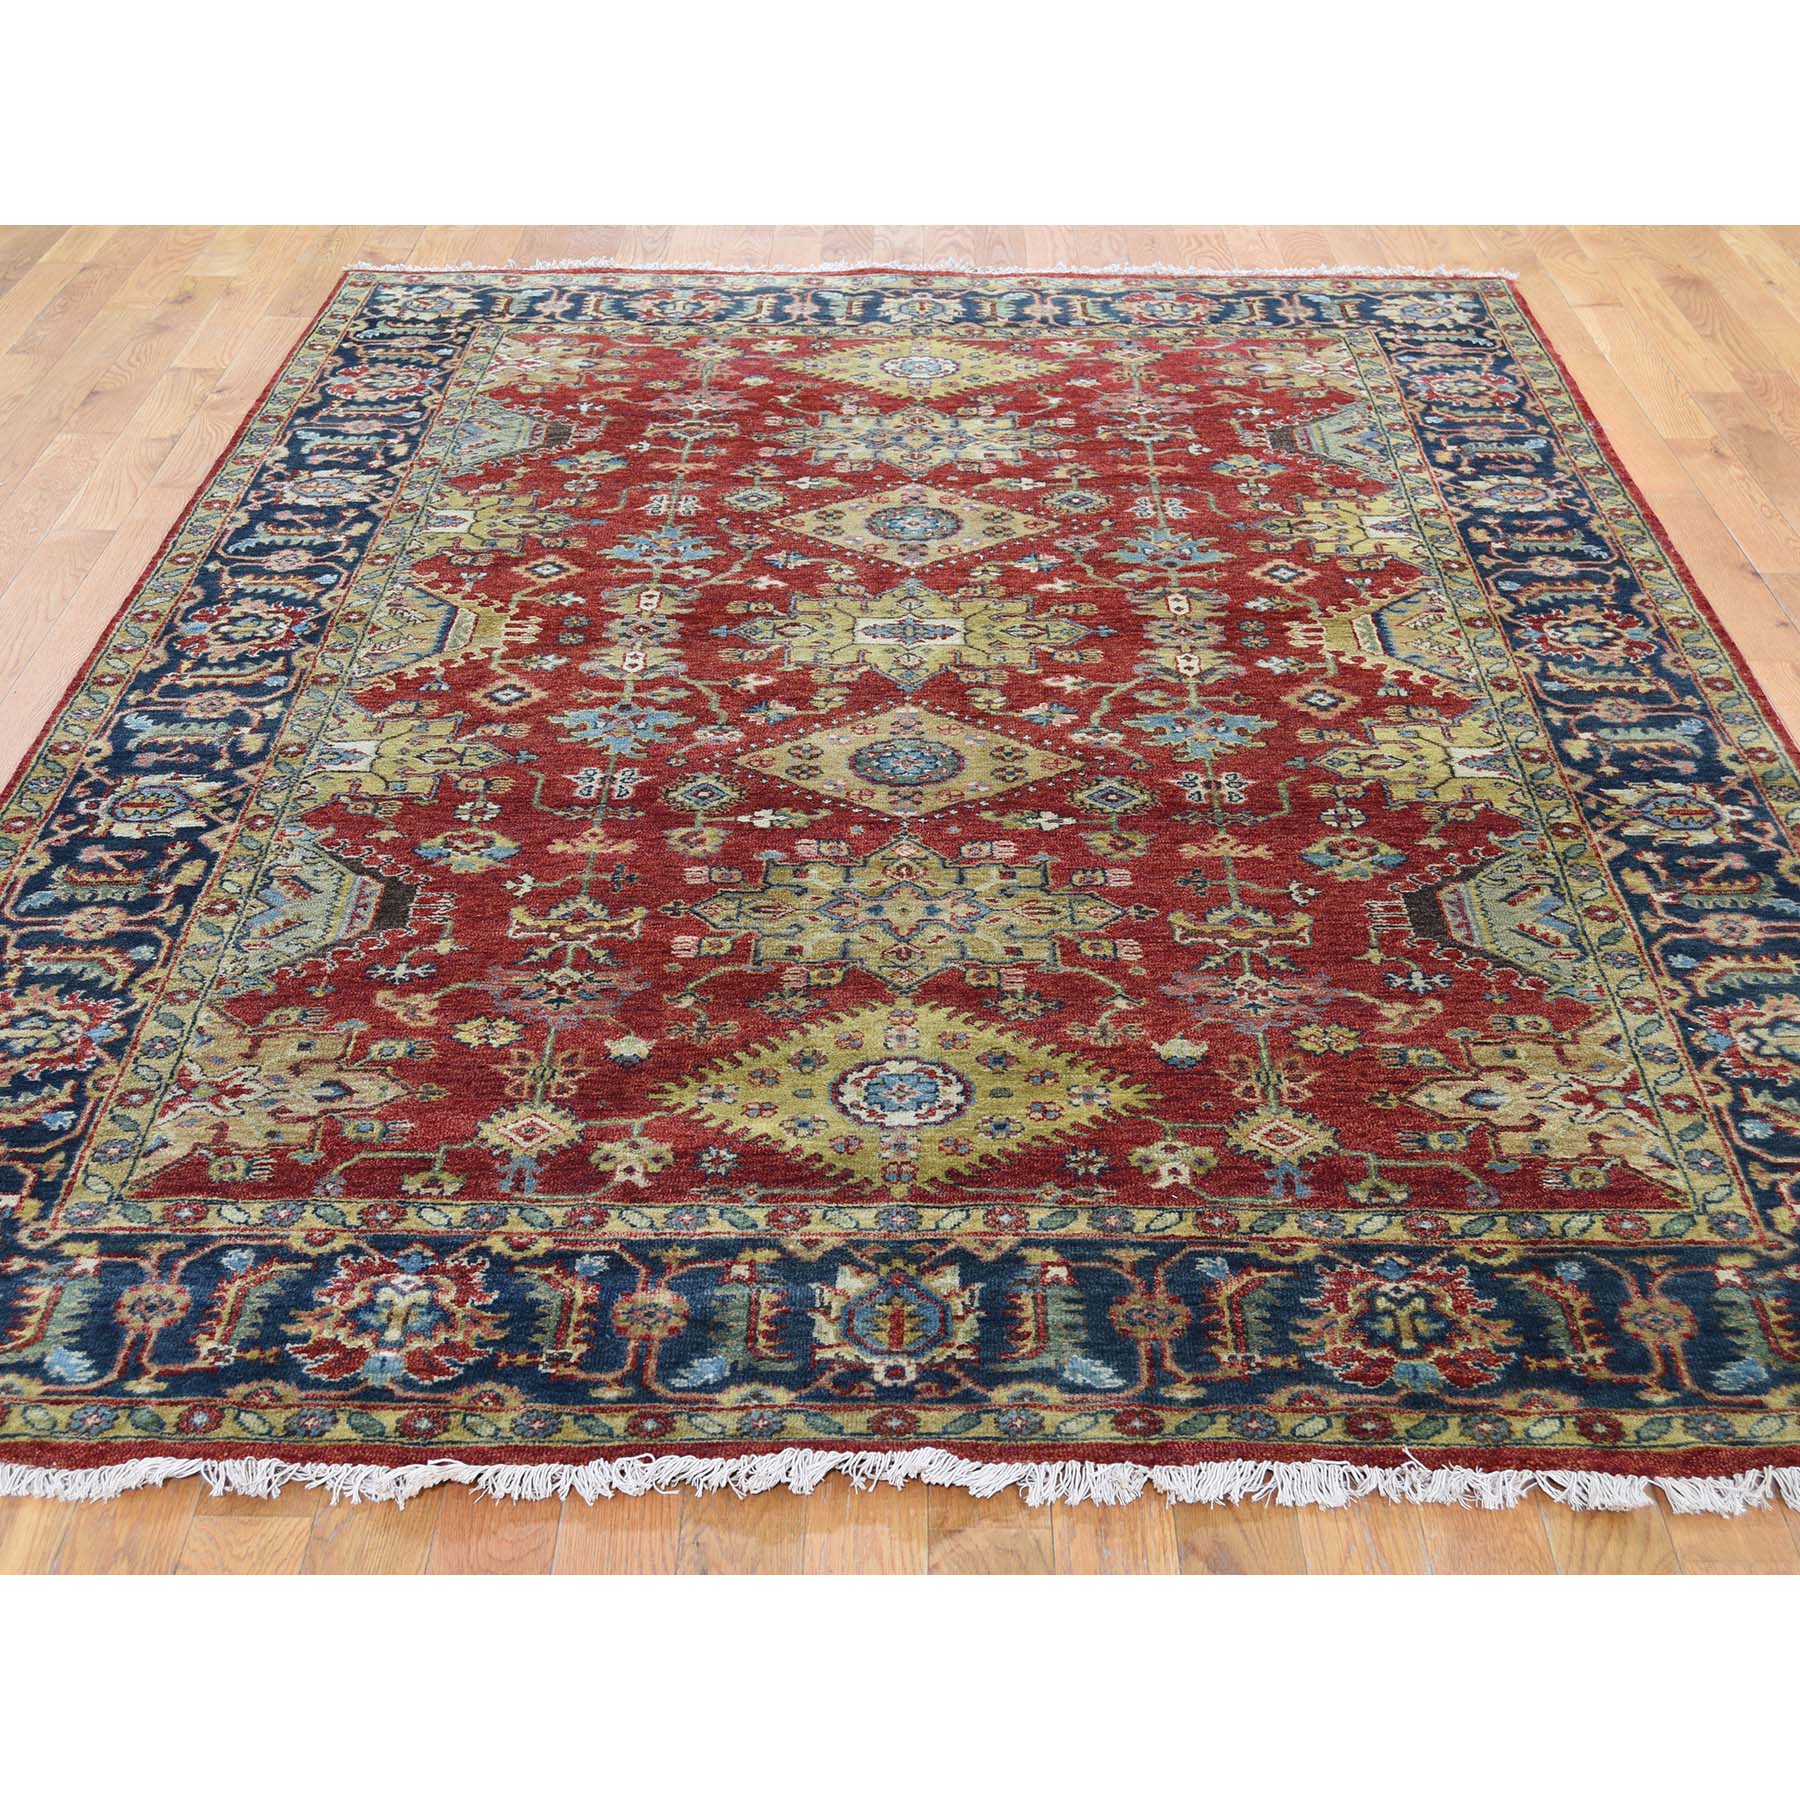 6-x8-9  Red Karajeh Design Pure Wool Hand-Knotted Oriental Rug 